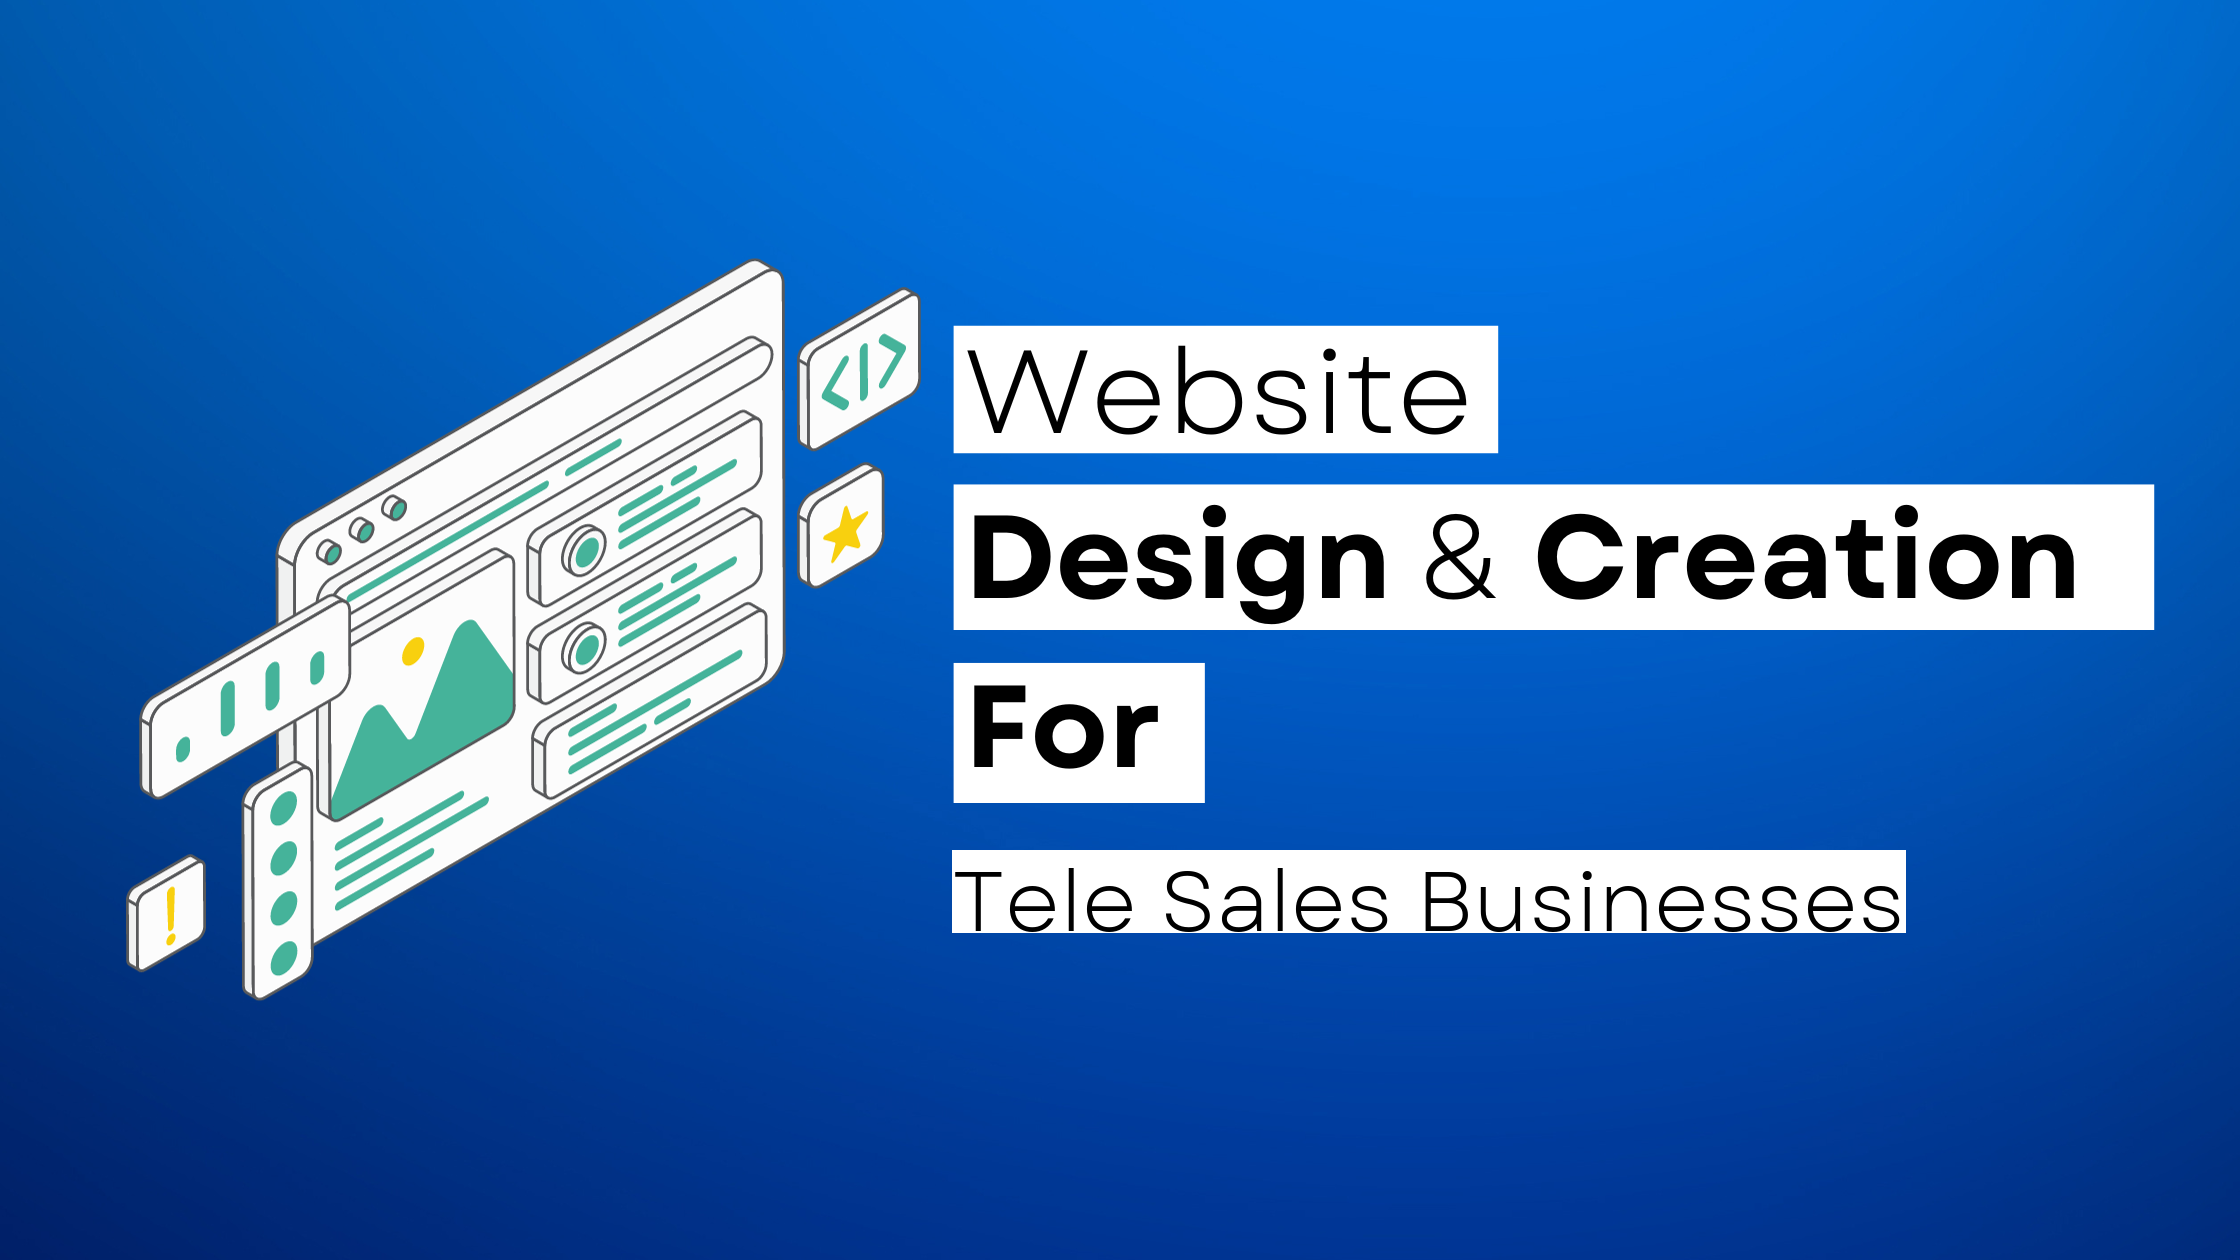 How to start a Tele Sales website